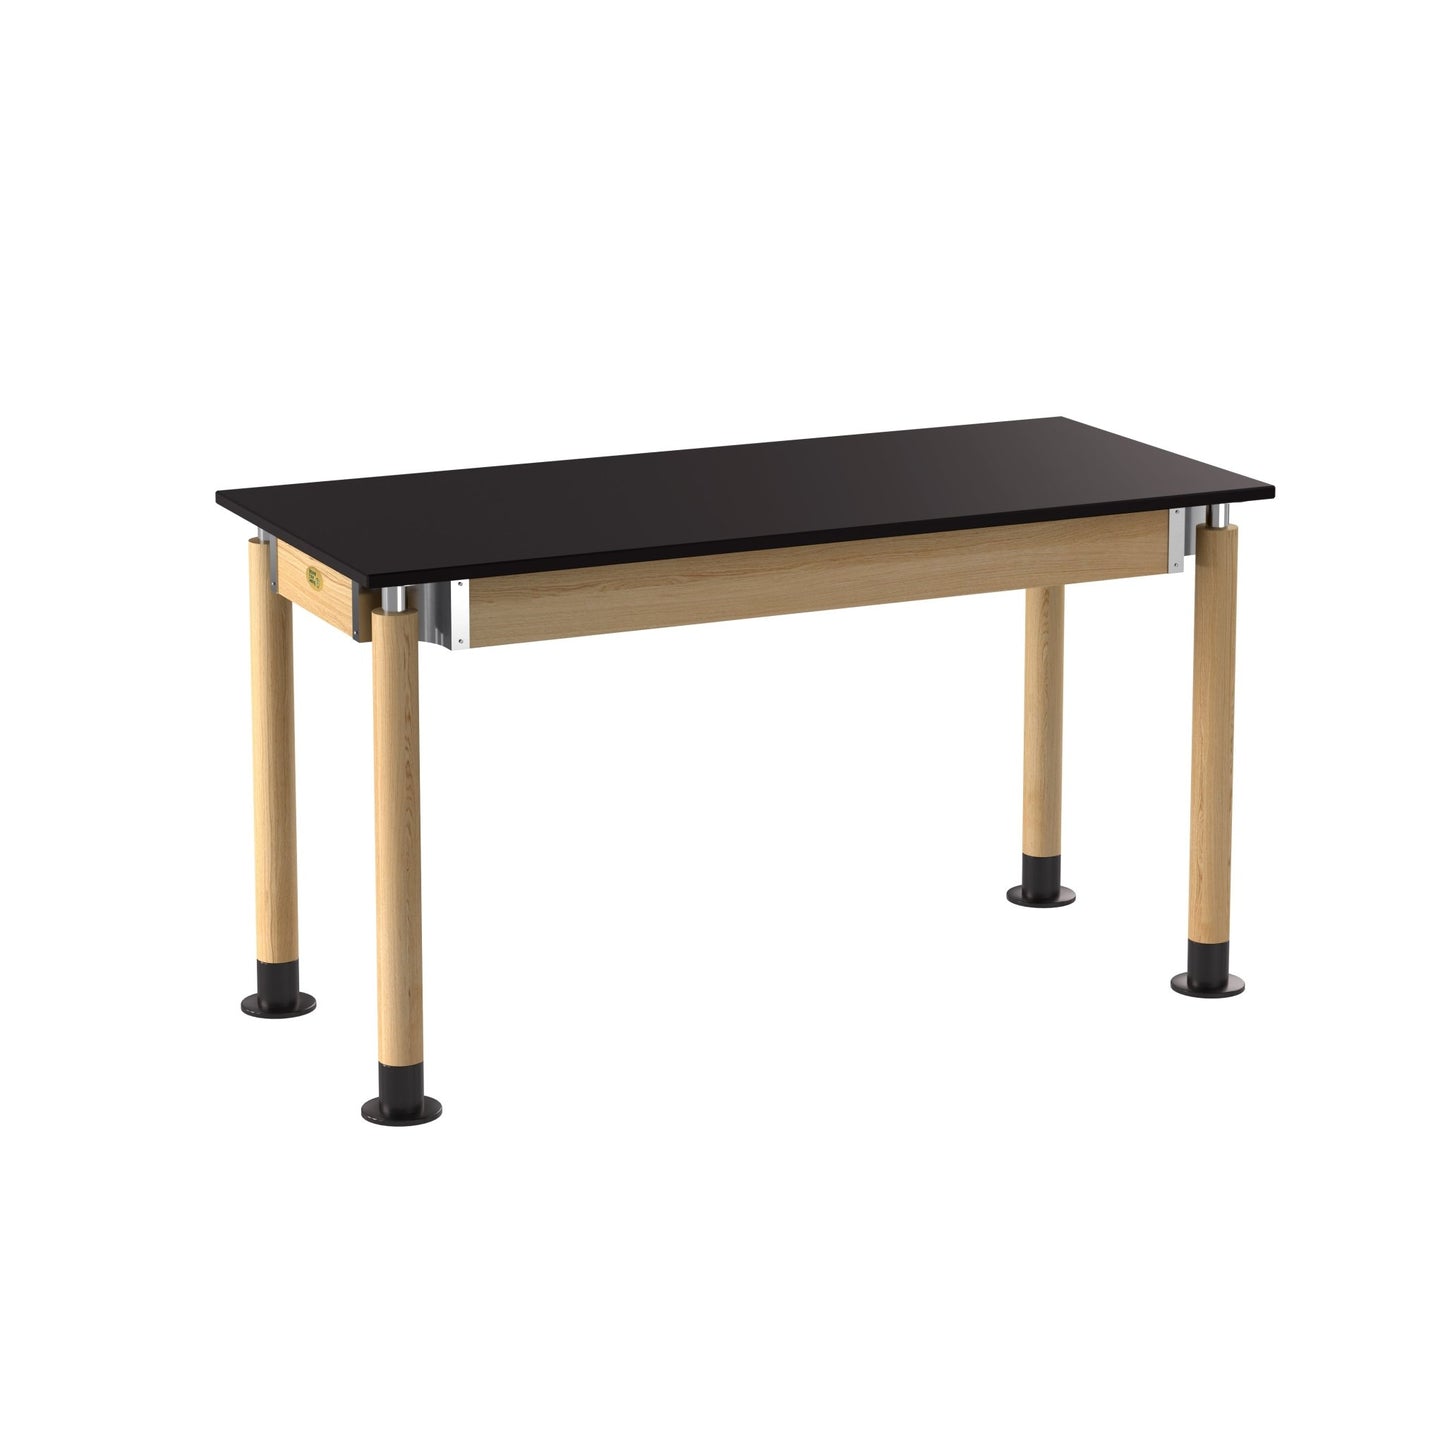 NPS Height Adjustable Science Lab Table, 24" X 54", Phenolic Top, Oak Legs (National Public Seating NPS-SLT5-2454P) - SchoolOutlet